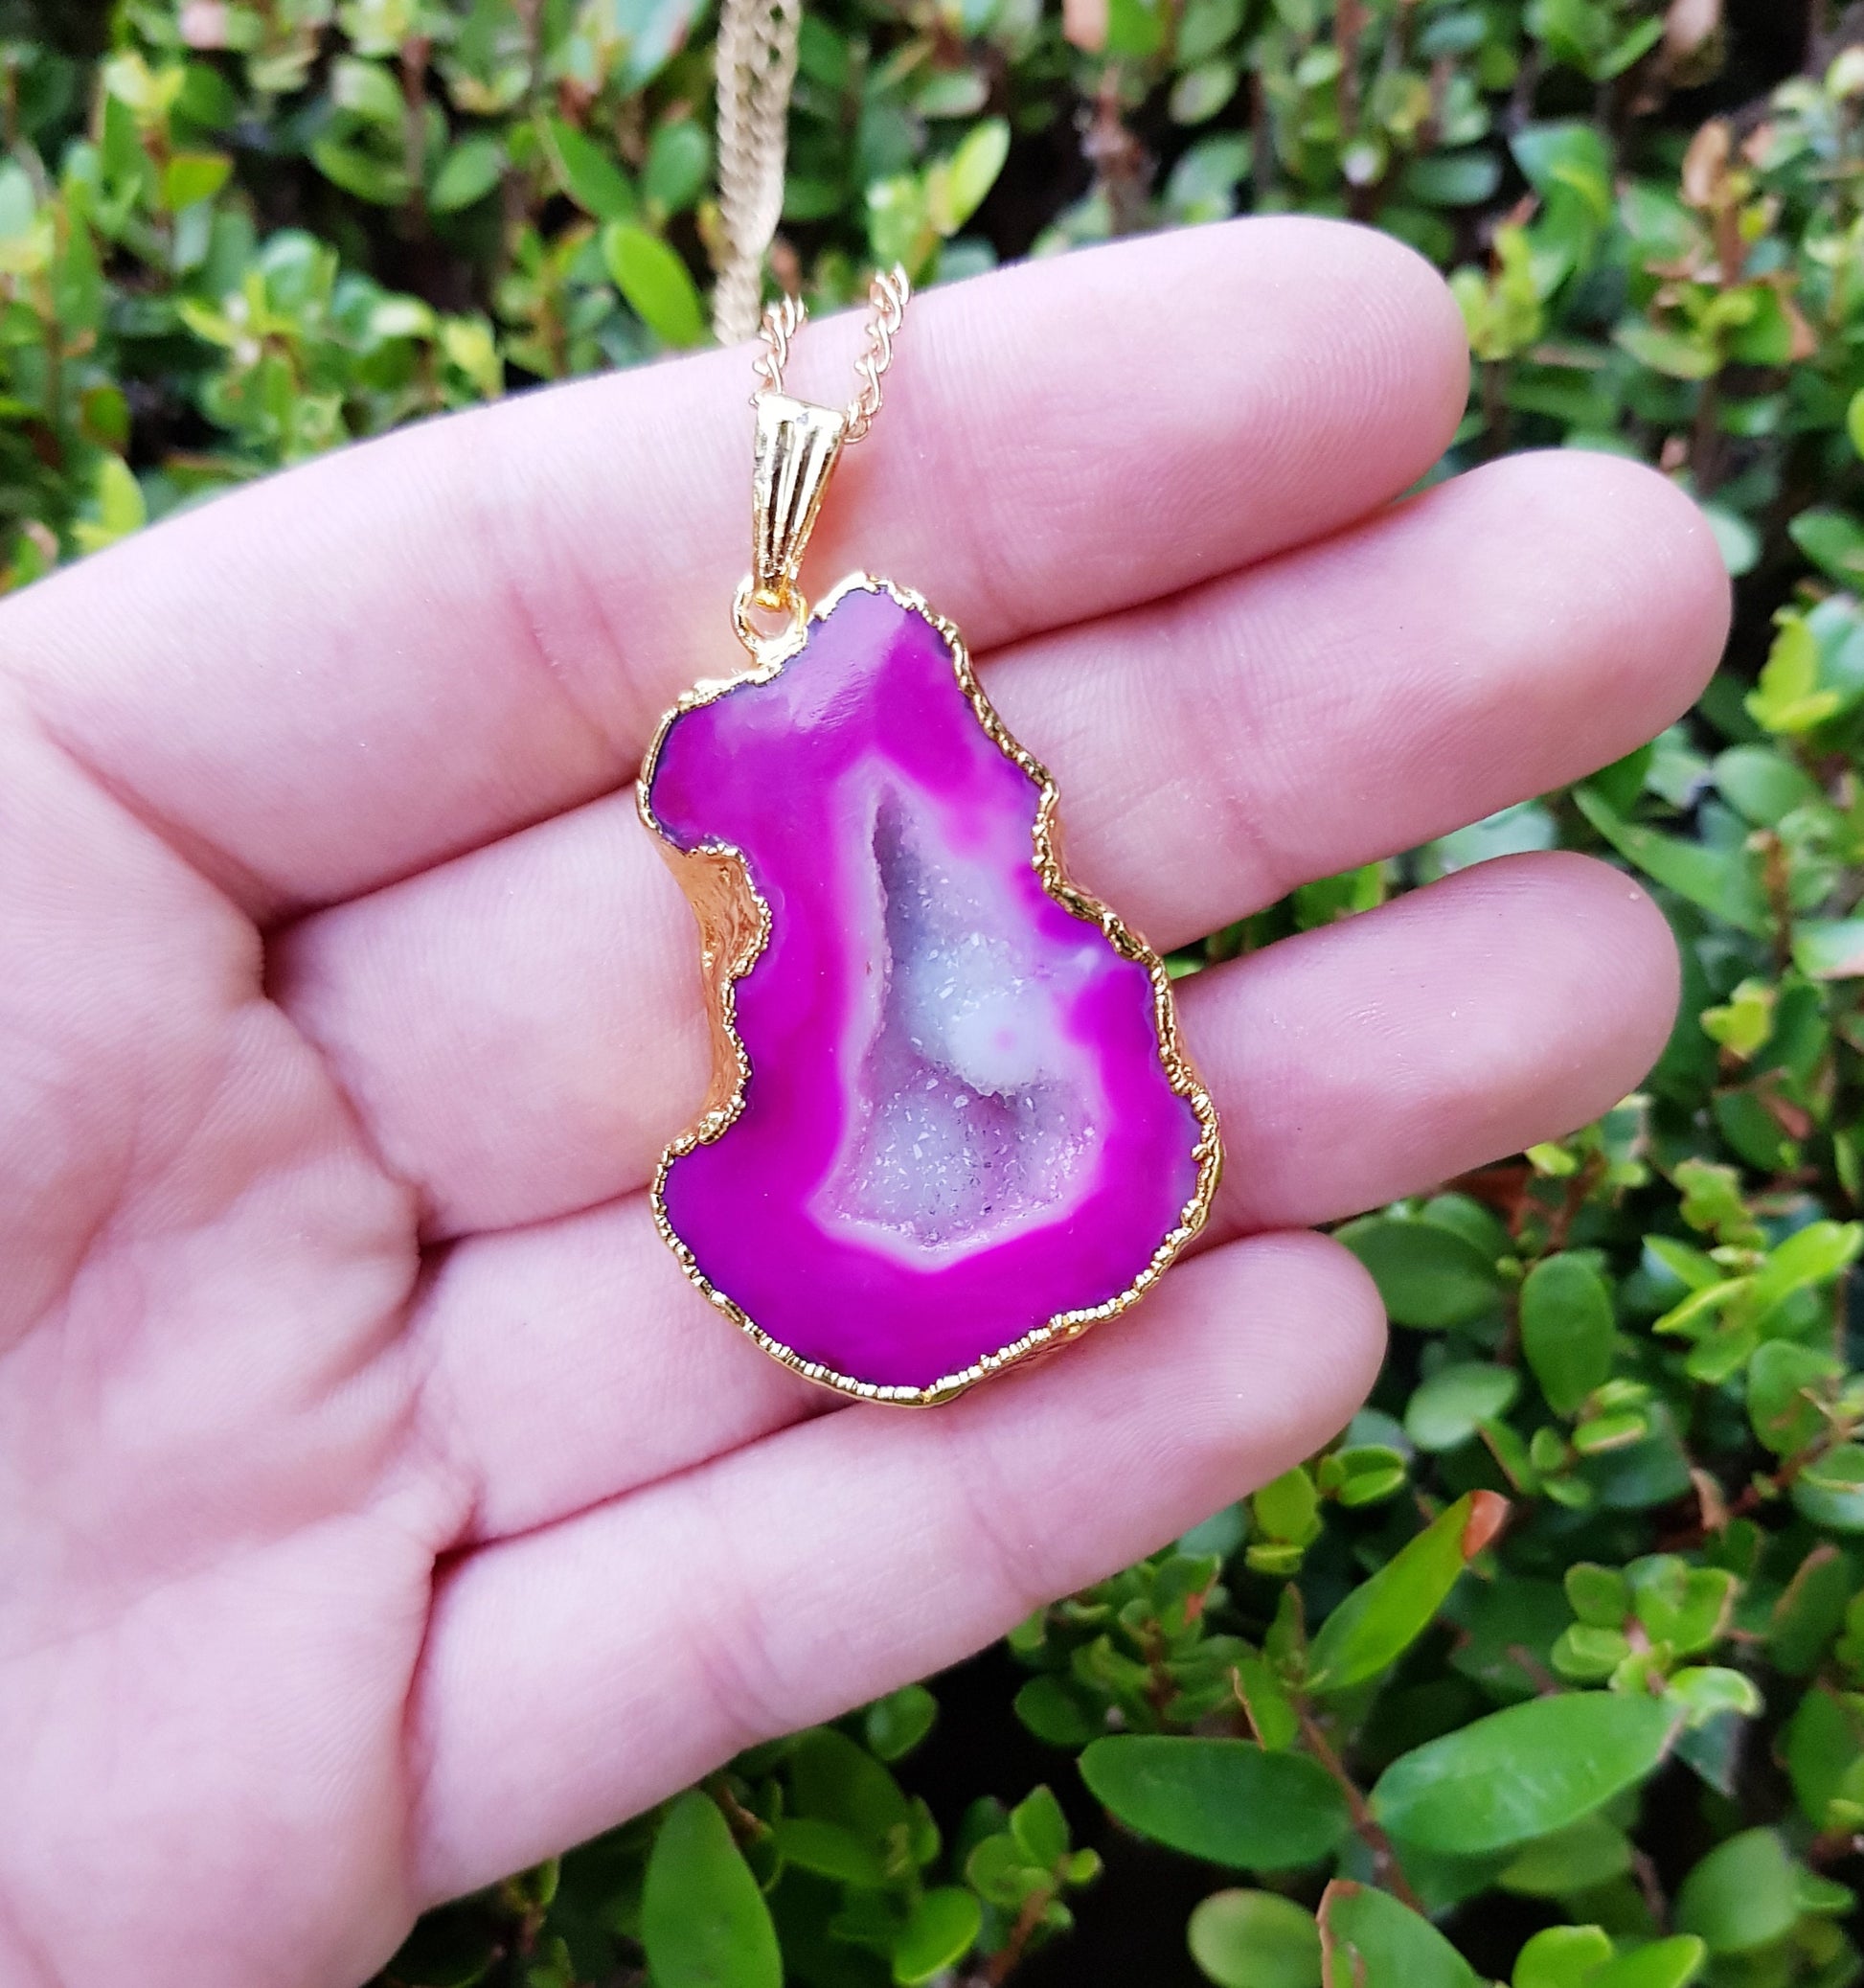 Pink Raw Druzy Agate Pendant Gold Plated Statement Pendant Boho Gemstone Necklace Unique Gift One Of A Kind Gift